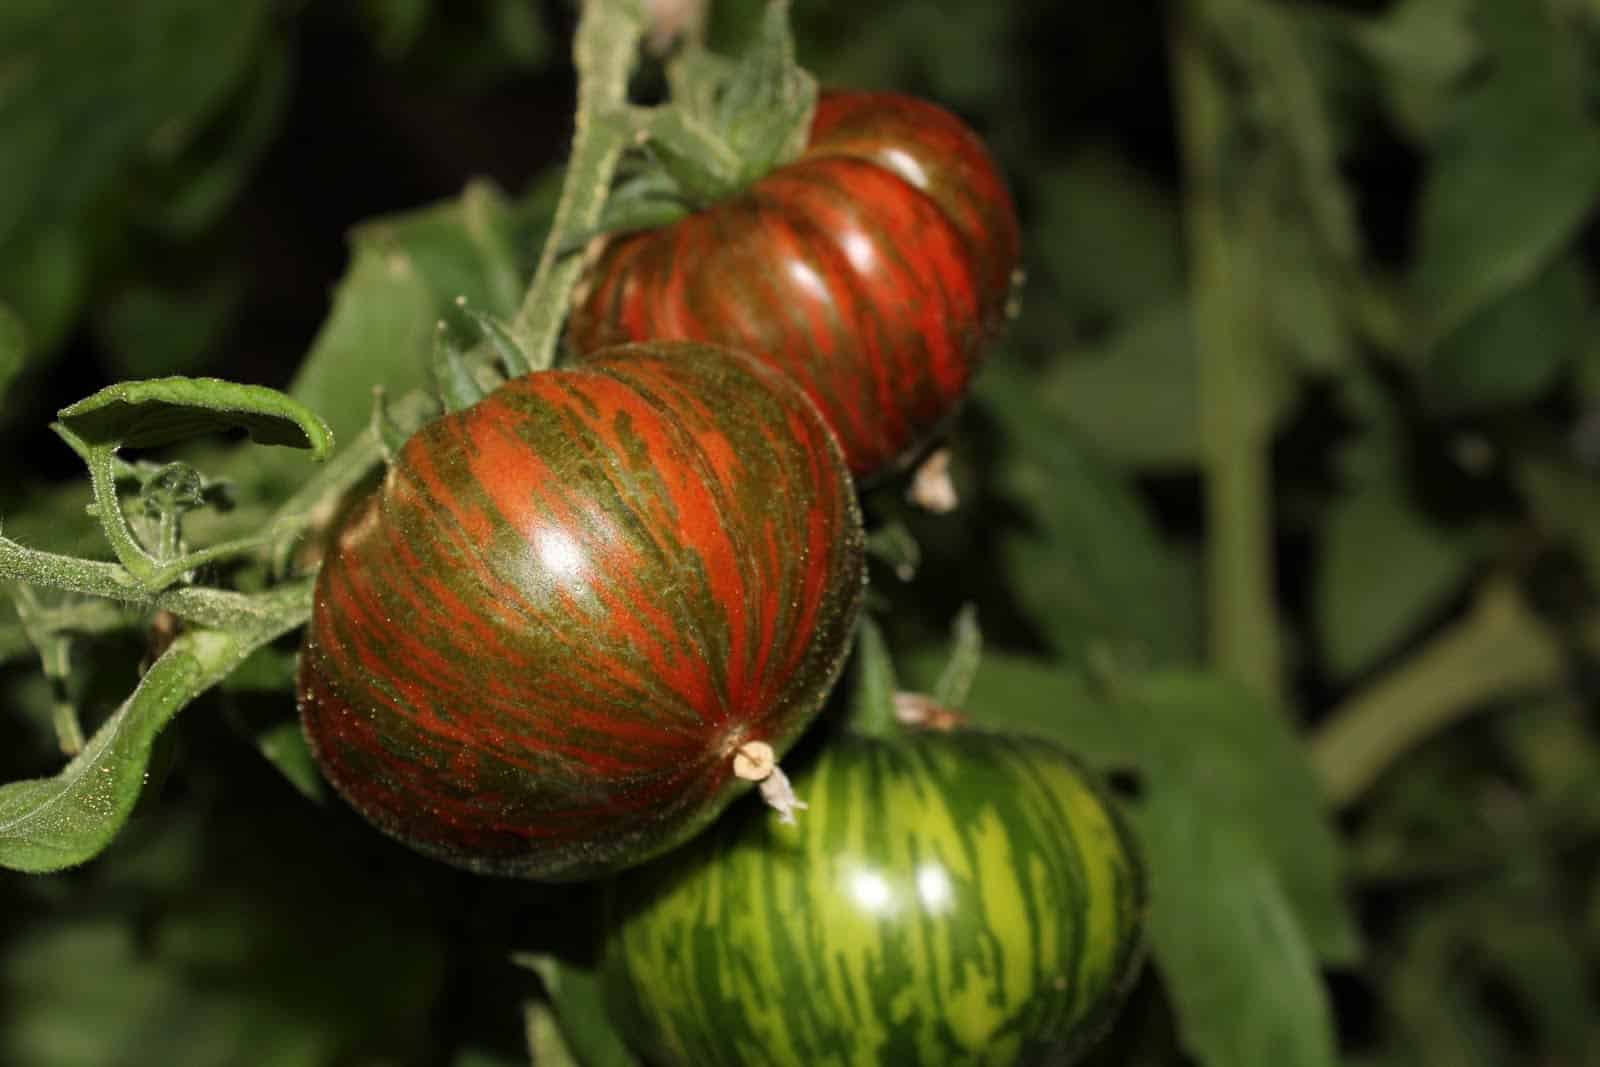 Chocolate Striped tomatoes on the vine